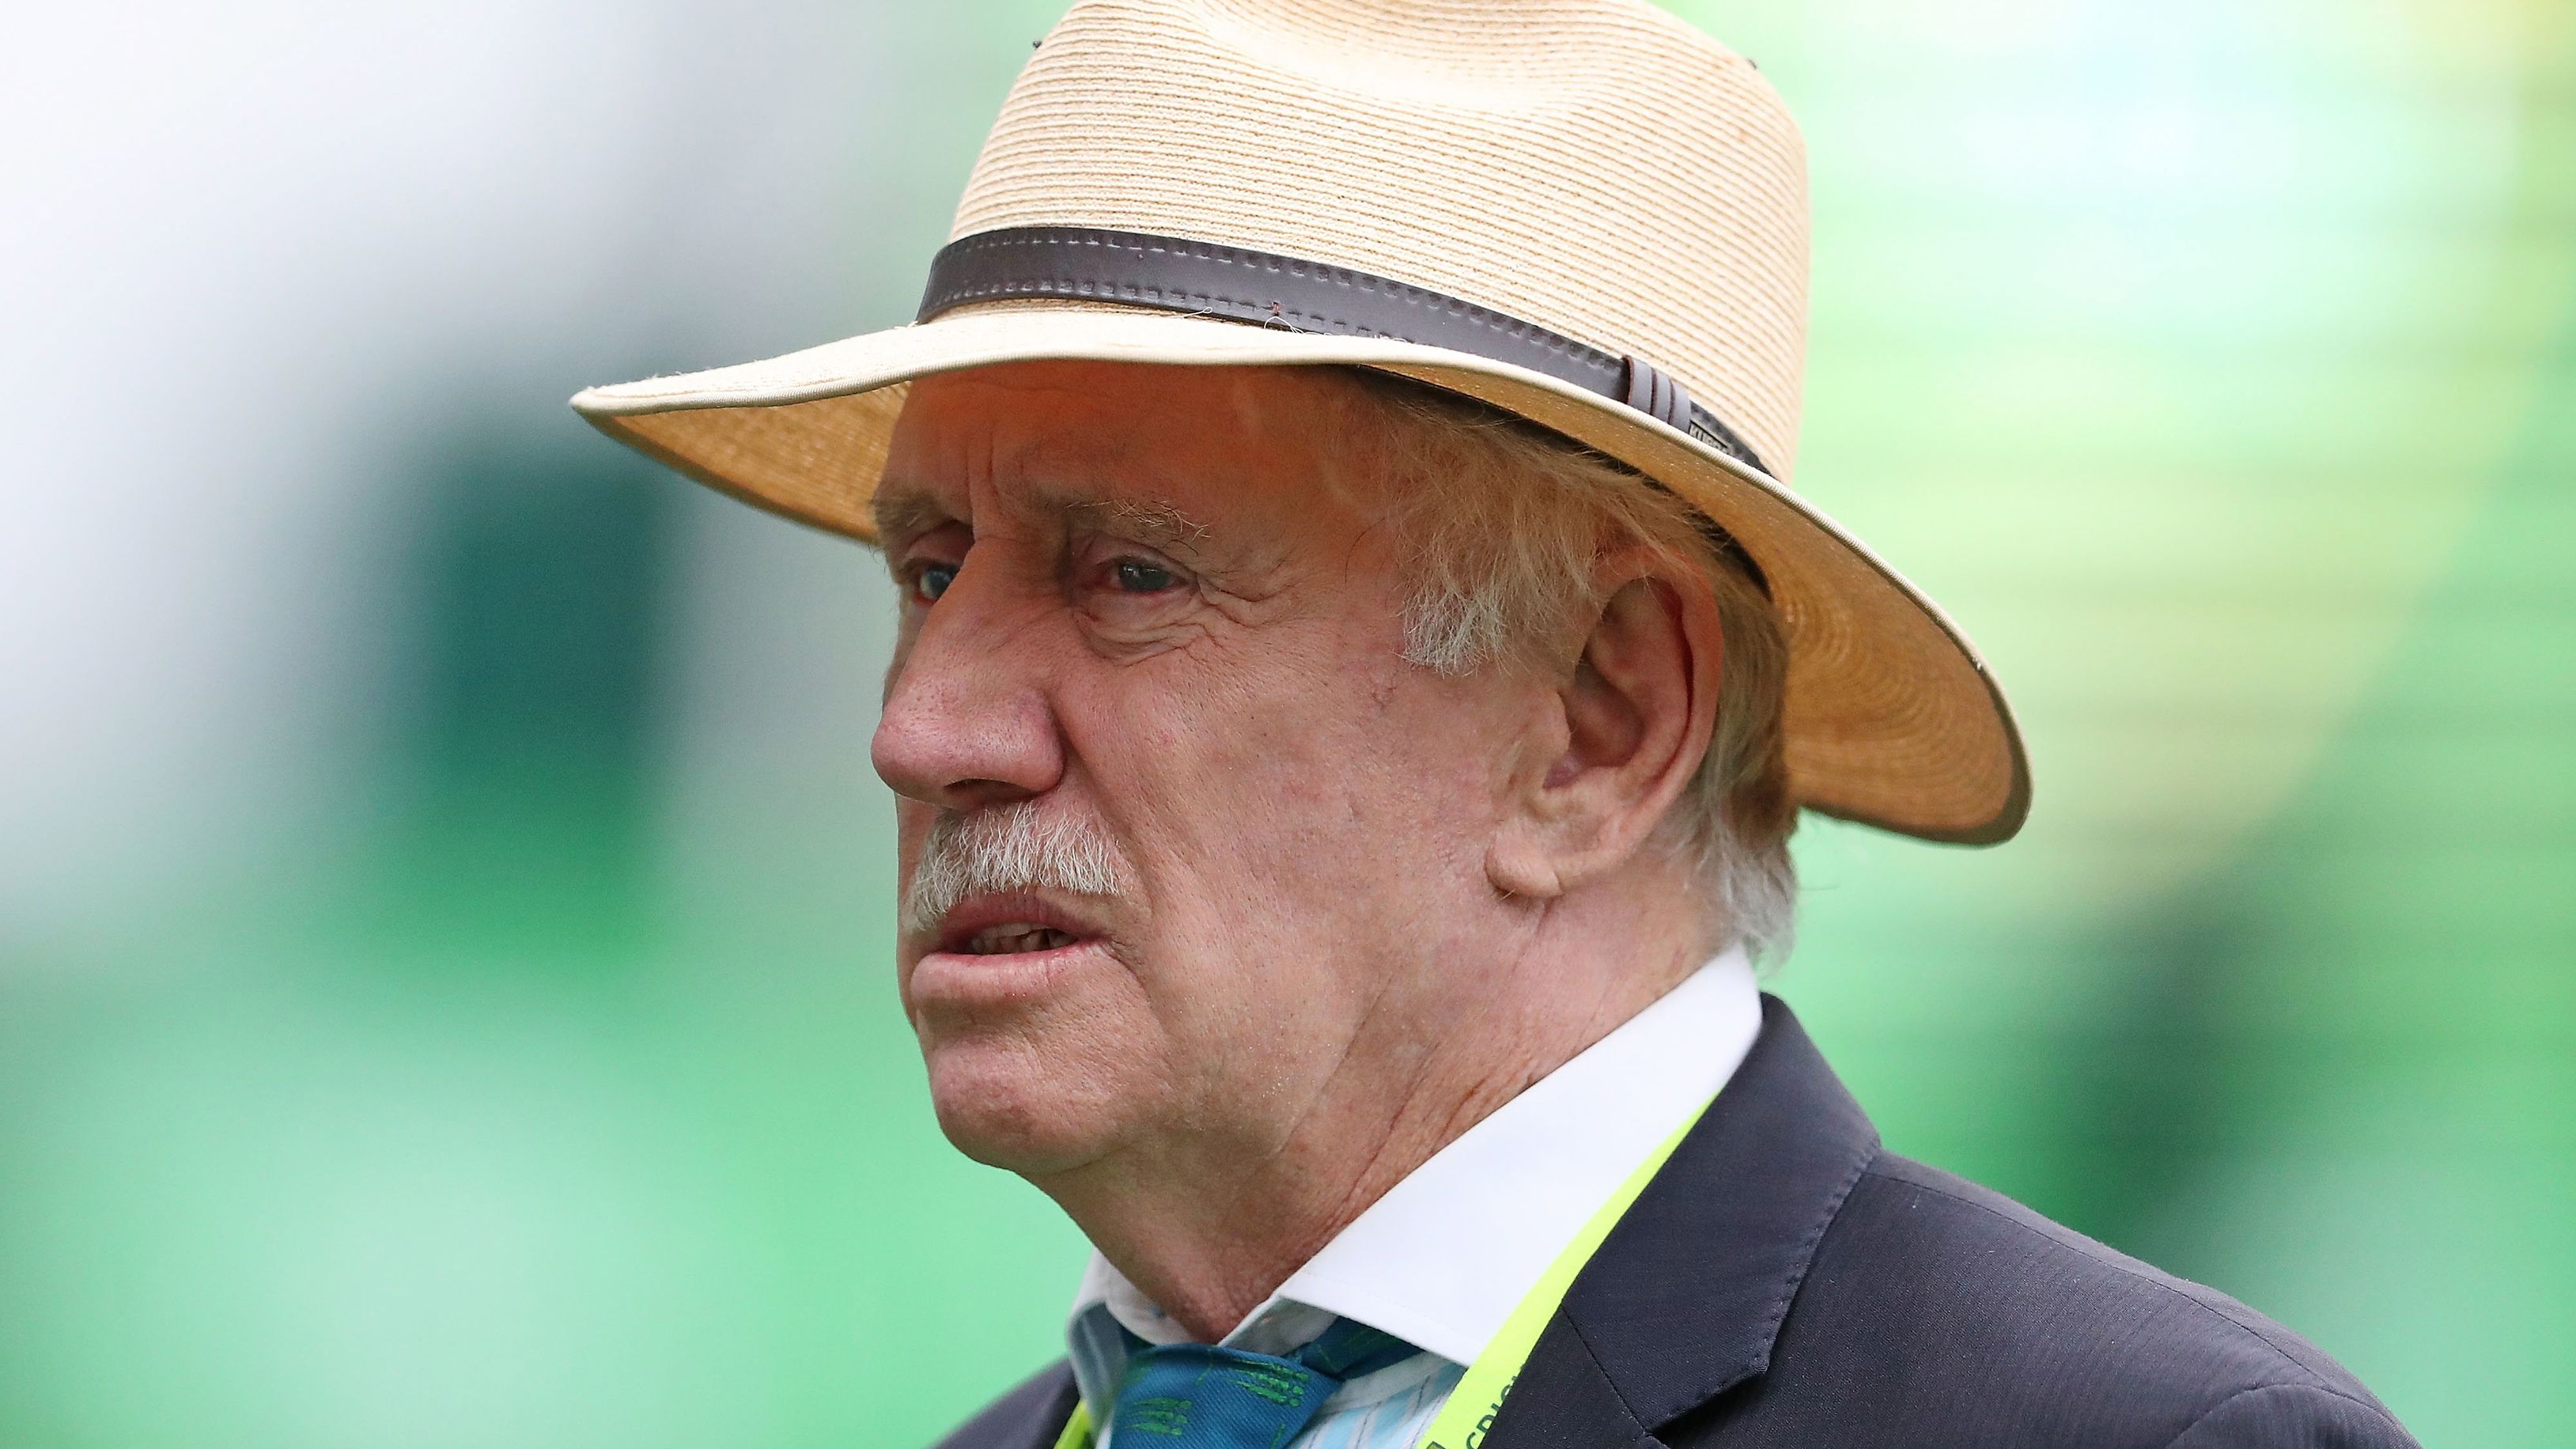 Former Australian captain Ian Chappell during day three of the Second Test match between Australia and Pakistan at Melbourne Cricket Ground on December 28, 2016 in Melbourne, Australia.